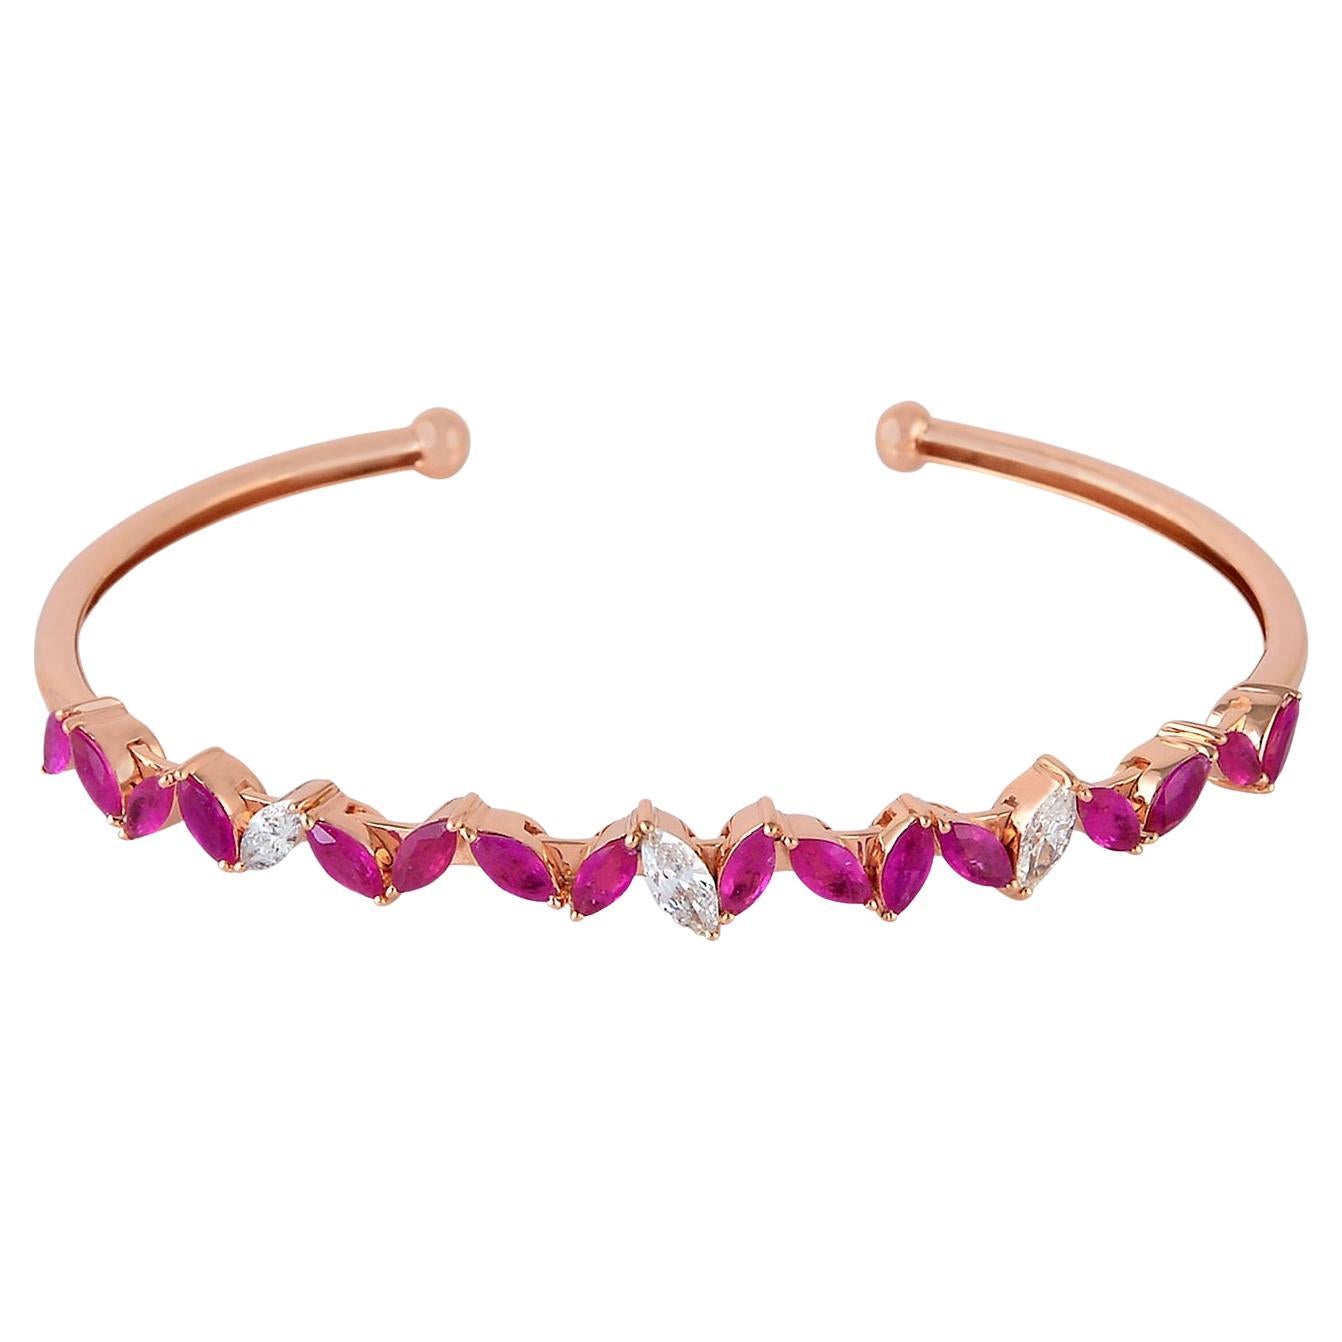 Marquise Shaped Ruby & Diamond Bangle Made In 18k Gold